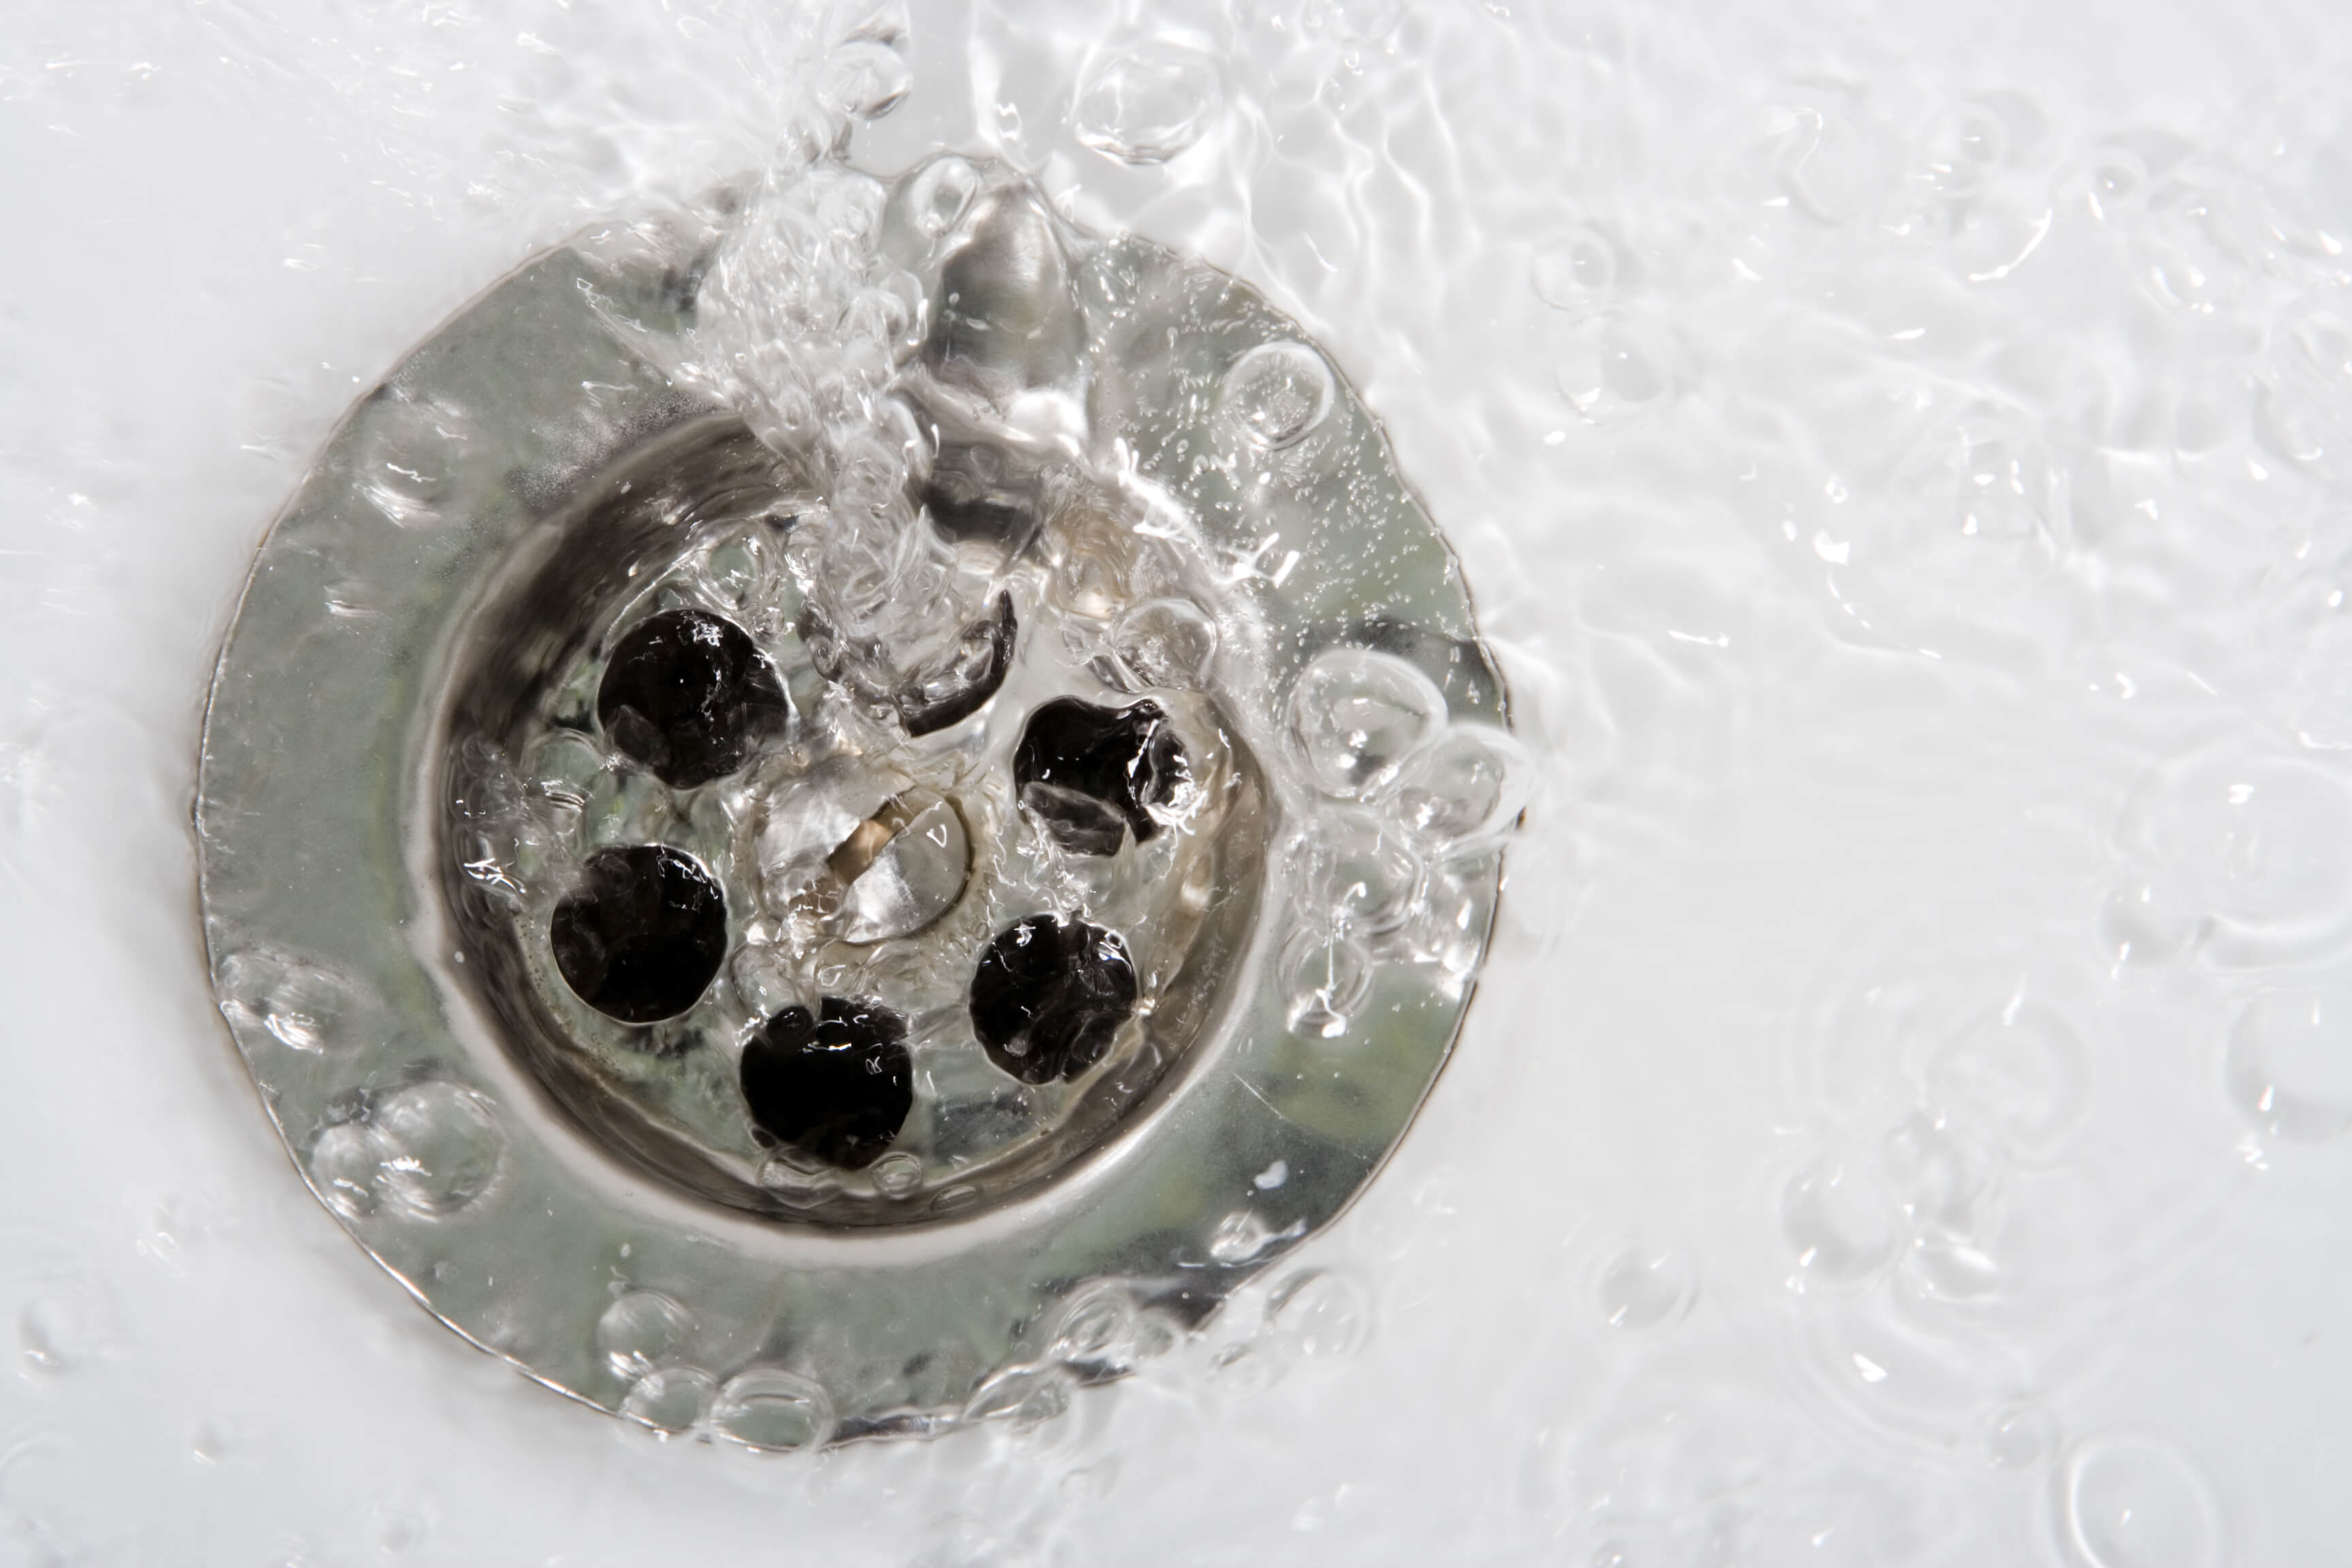 drain cleaning in Sacramento by America's Plumbing